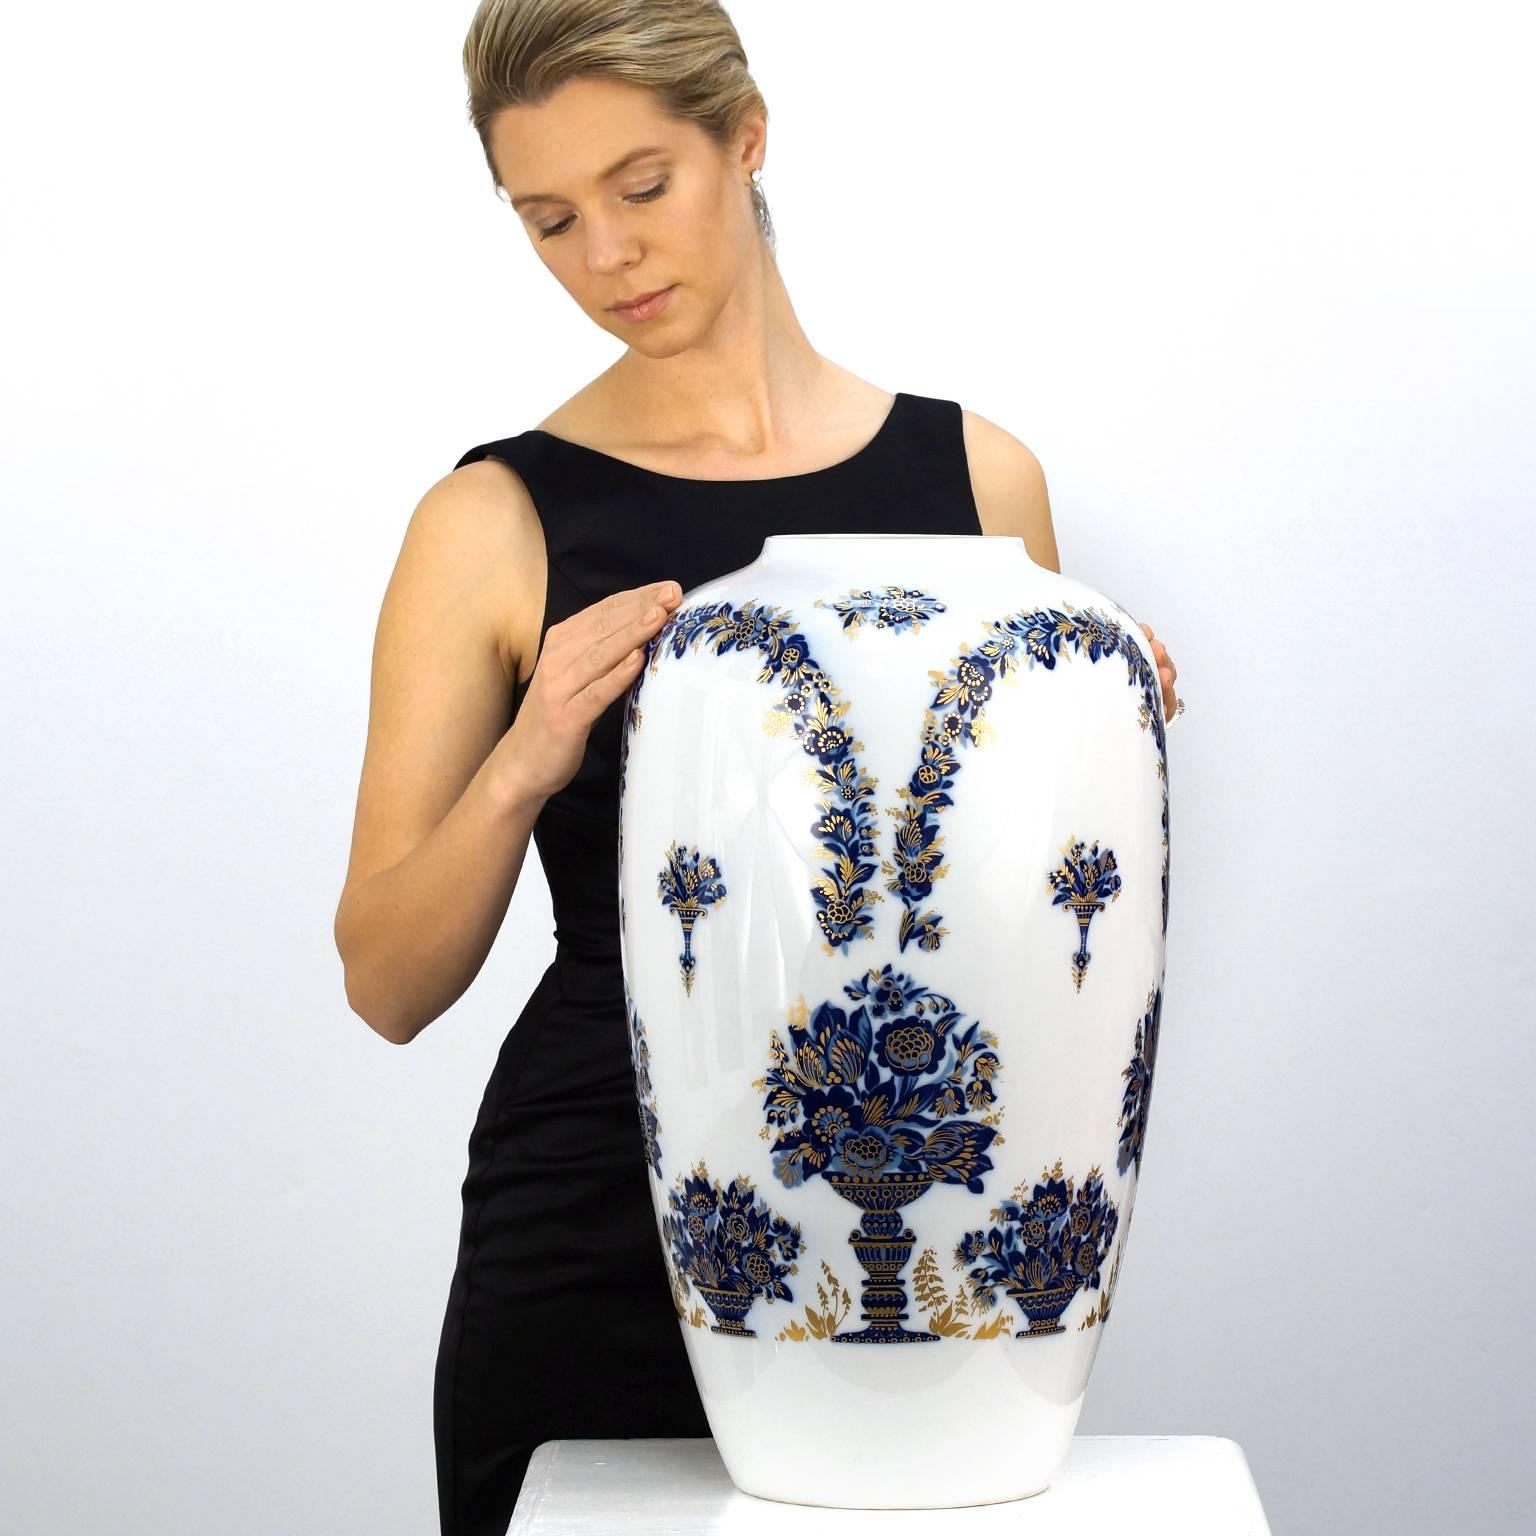 Circa 1920s-30s, marked on bottom of vase "Heinrich, Germany, and Hofgarten". These 21.5-inch-high porcelain vases are magnificently decorated in cobalt blue and gilded Italianate motifs inspired by the Court Gardens  in Munich. 